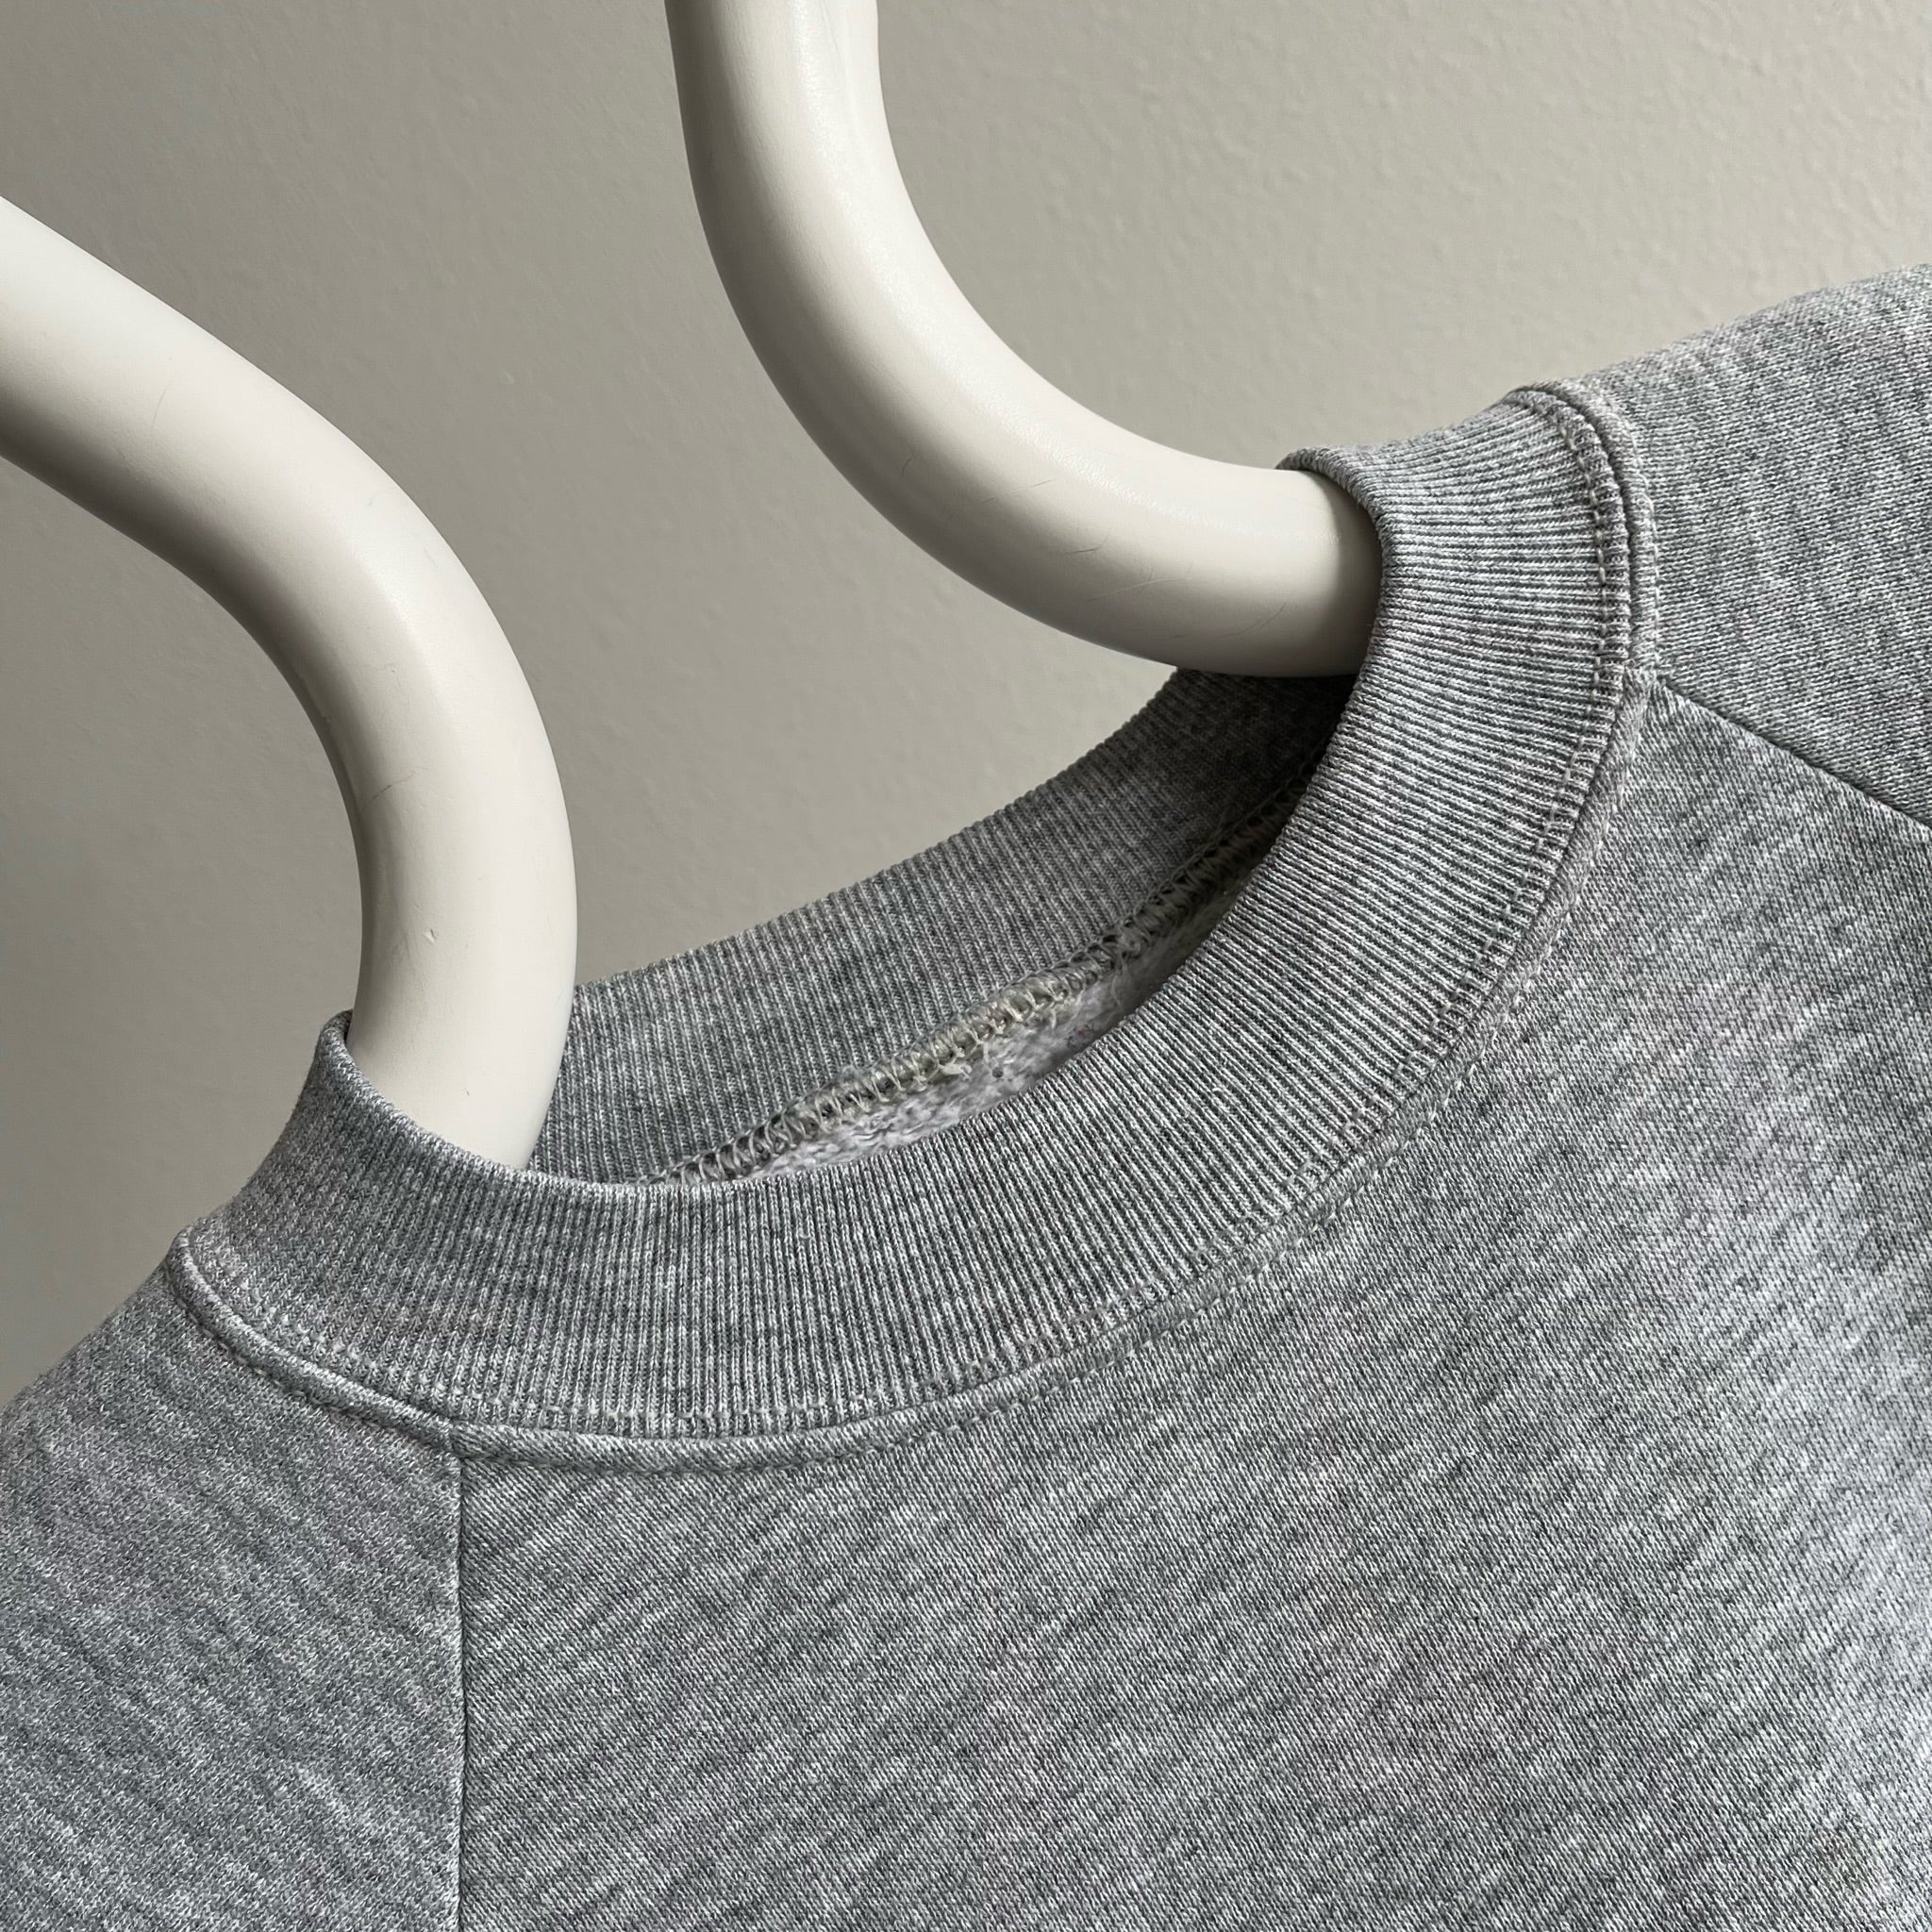 1990s Soft Blank Gray Raglan with Staining